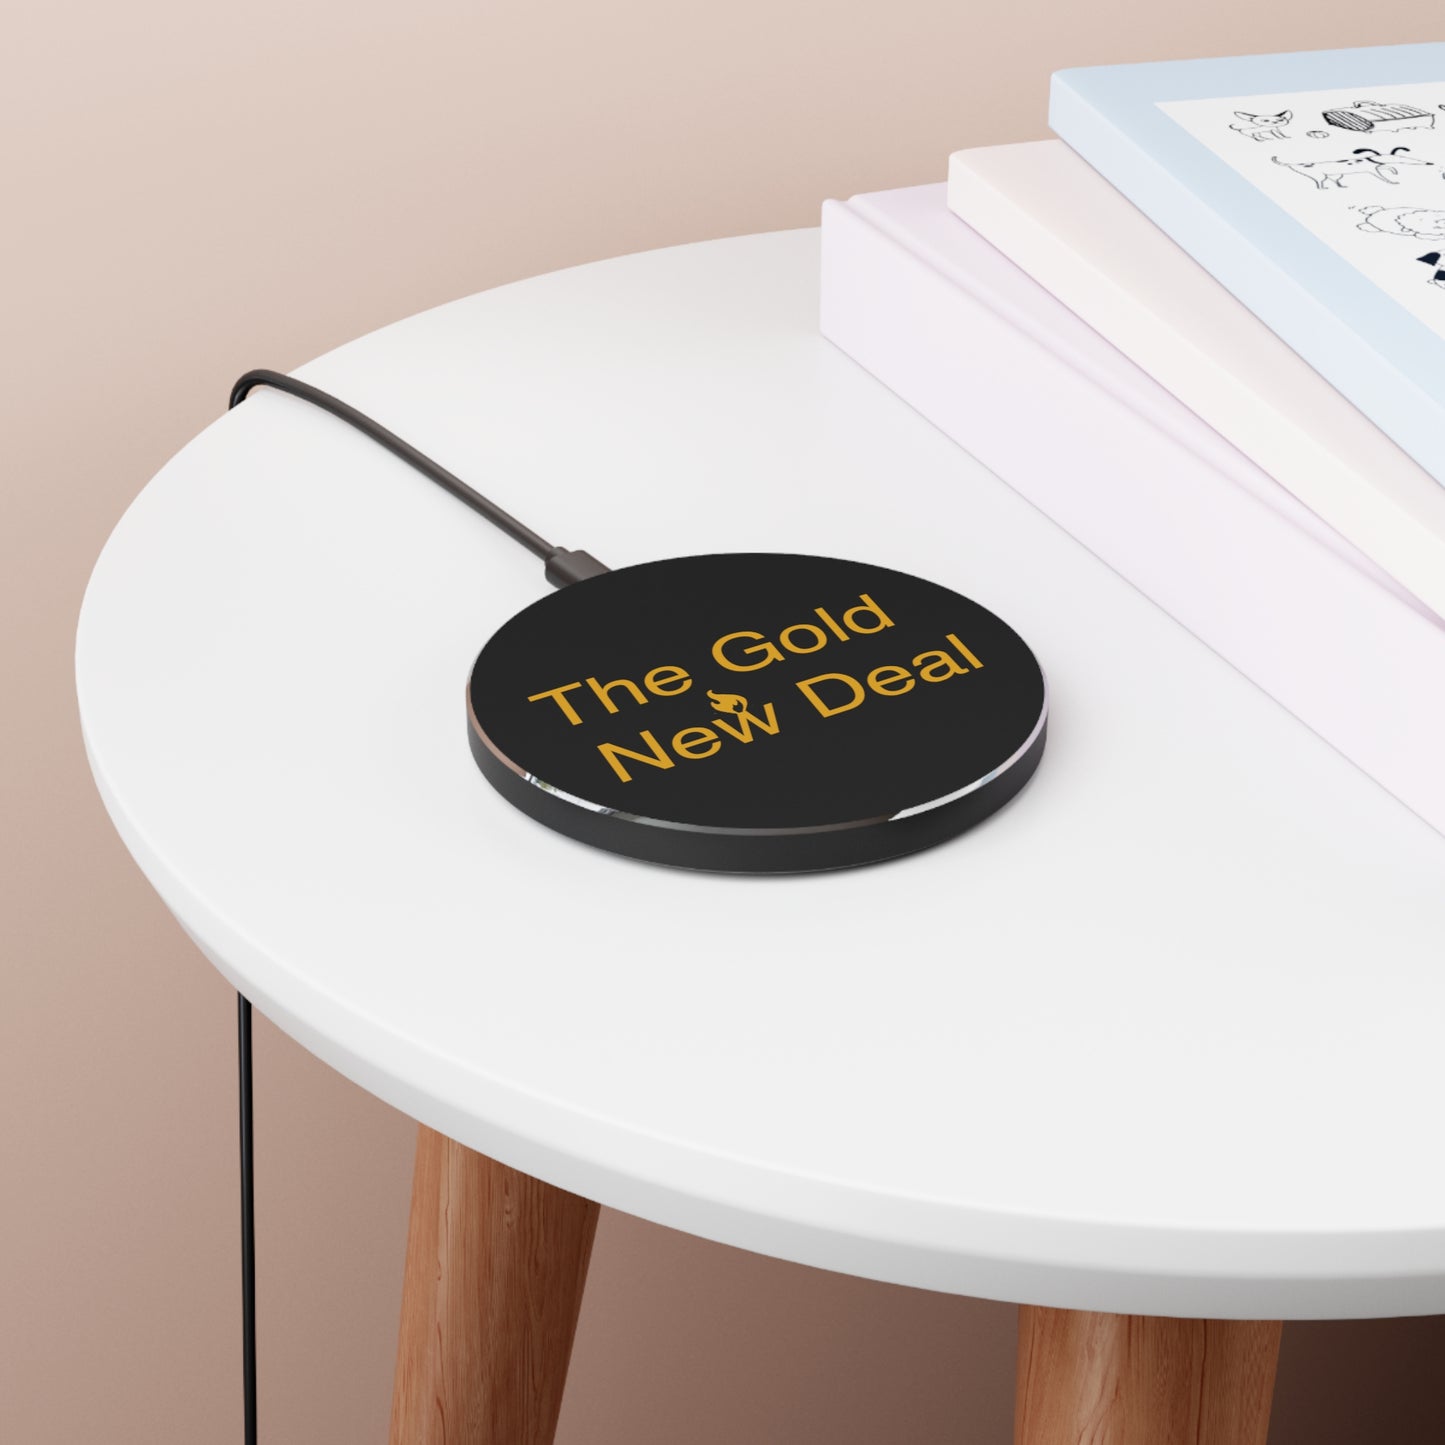 Gold New Deal Wireless Charger